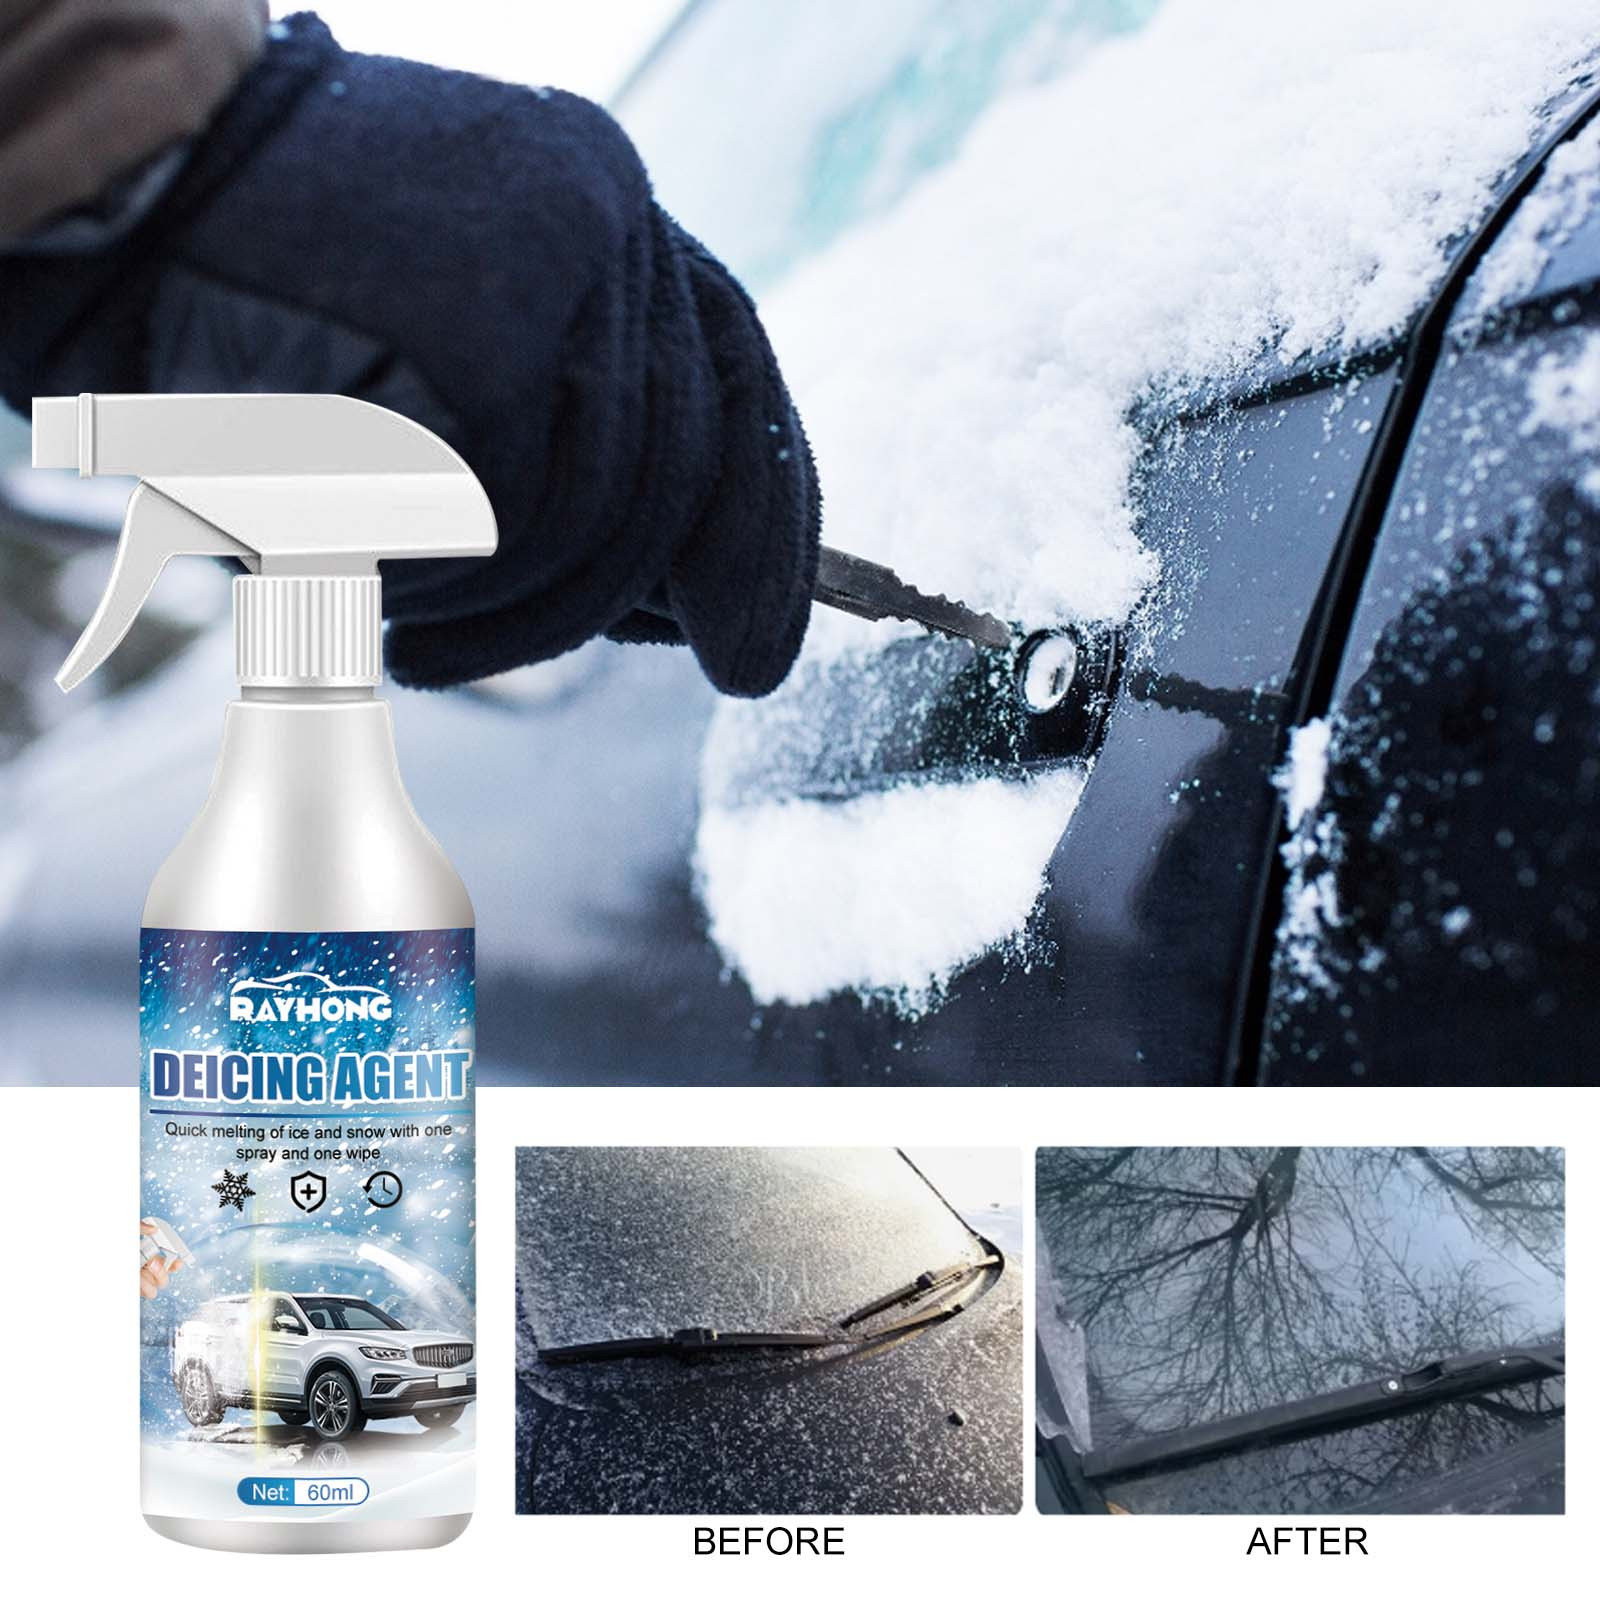 SDJMa Deicer Spray for Car Windshield Windows Wipers and Mirrors - Winter  Car Essentials - Auto Windshield Defroster Deicing Spray - Fast Ice & Snow  Melting Spray 60ml 